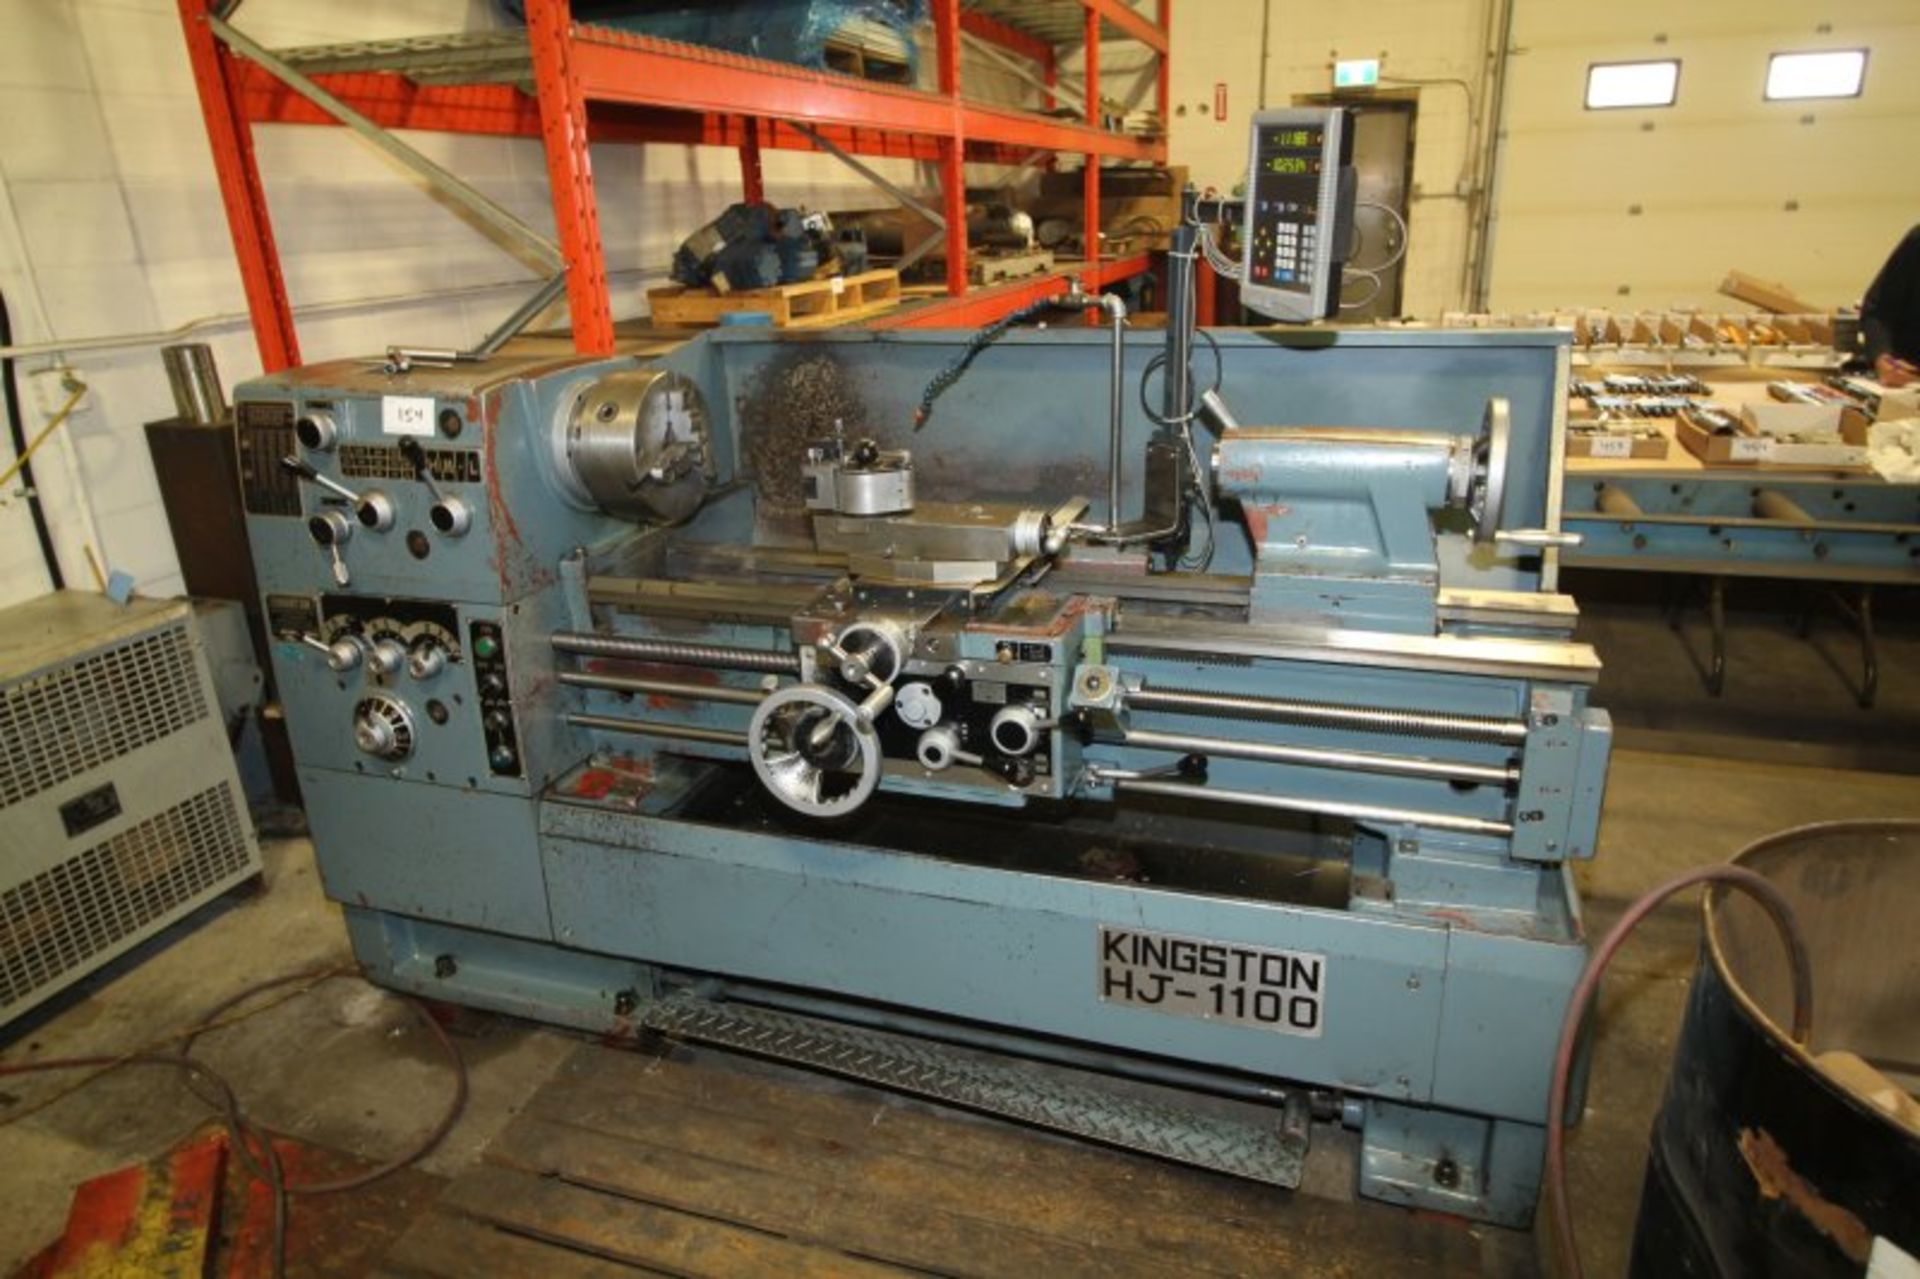 KINGSTON MODEL HJ-1100 TOOL ROOM LATHE, 2004, S/N CH04219 16IN X 40IN, NEWAL 2 AXIS DIGITAL READOUT